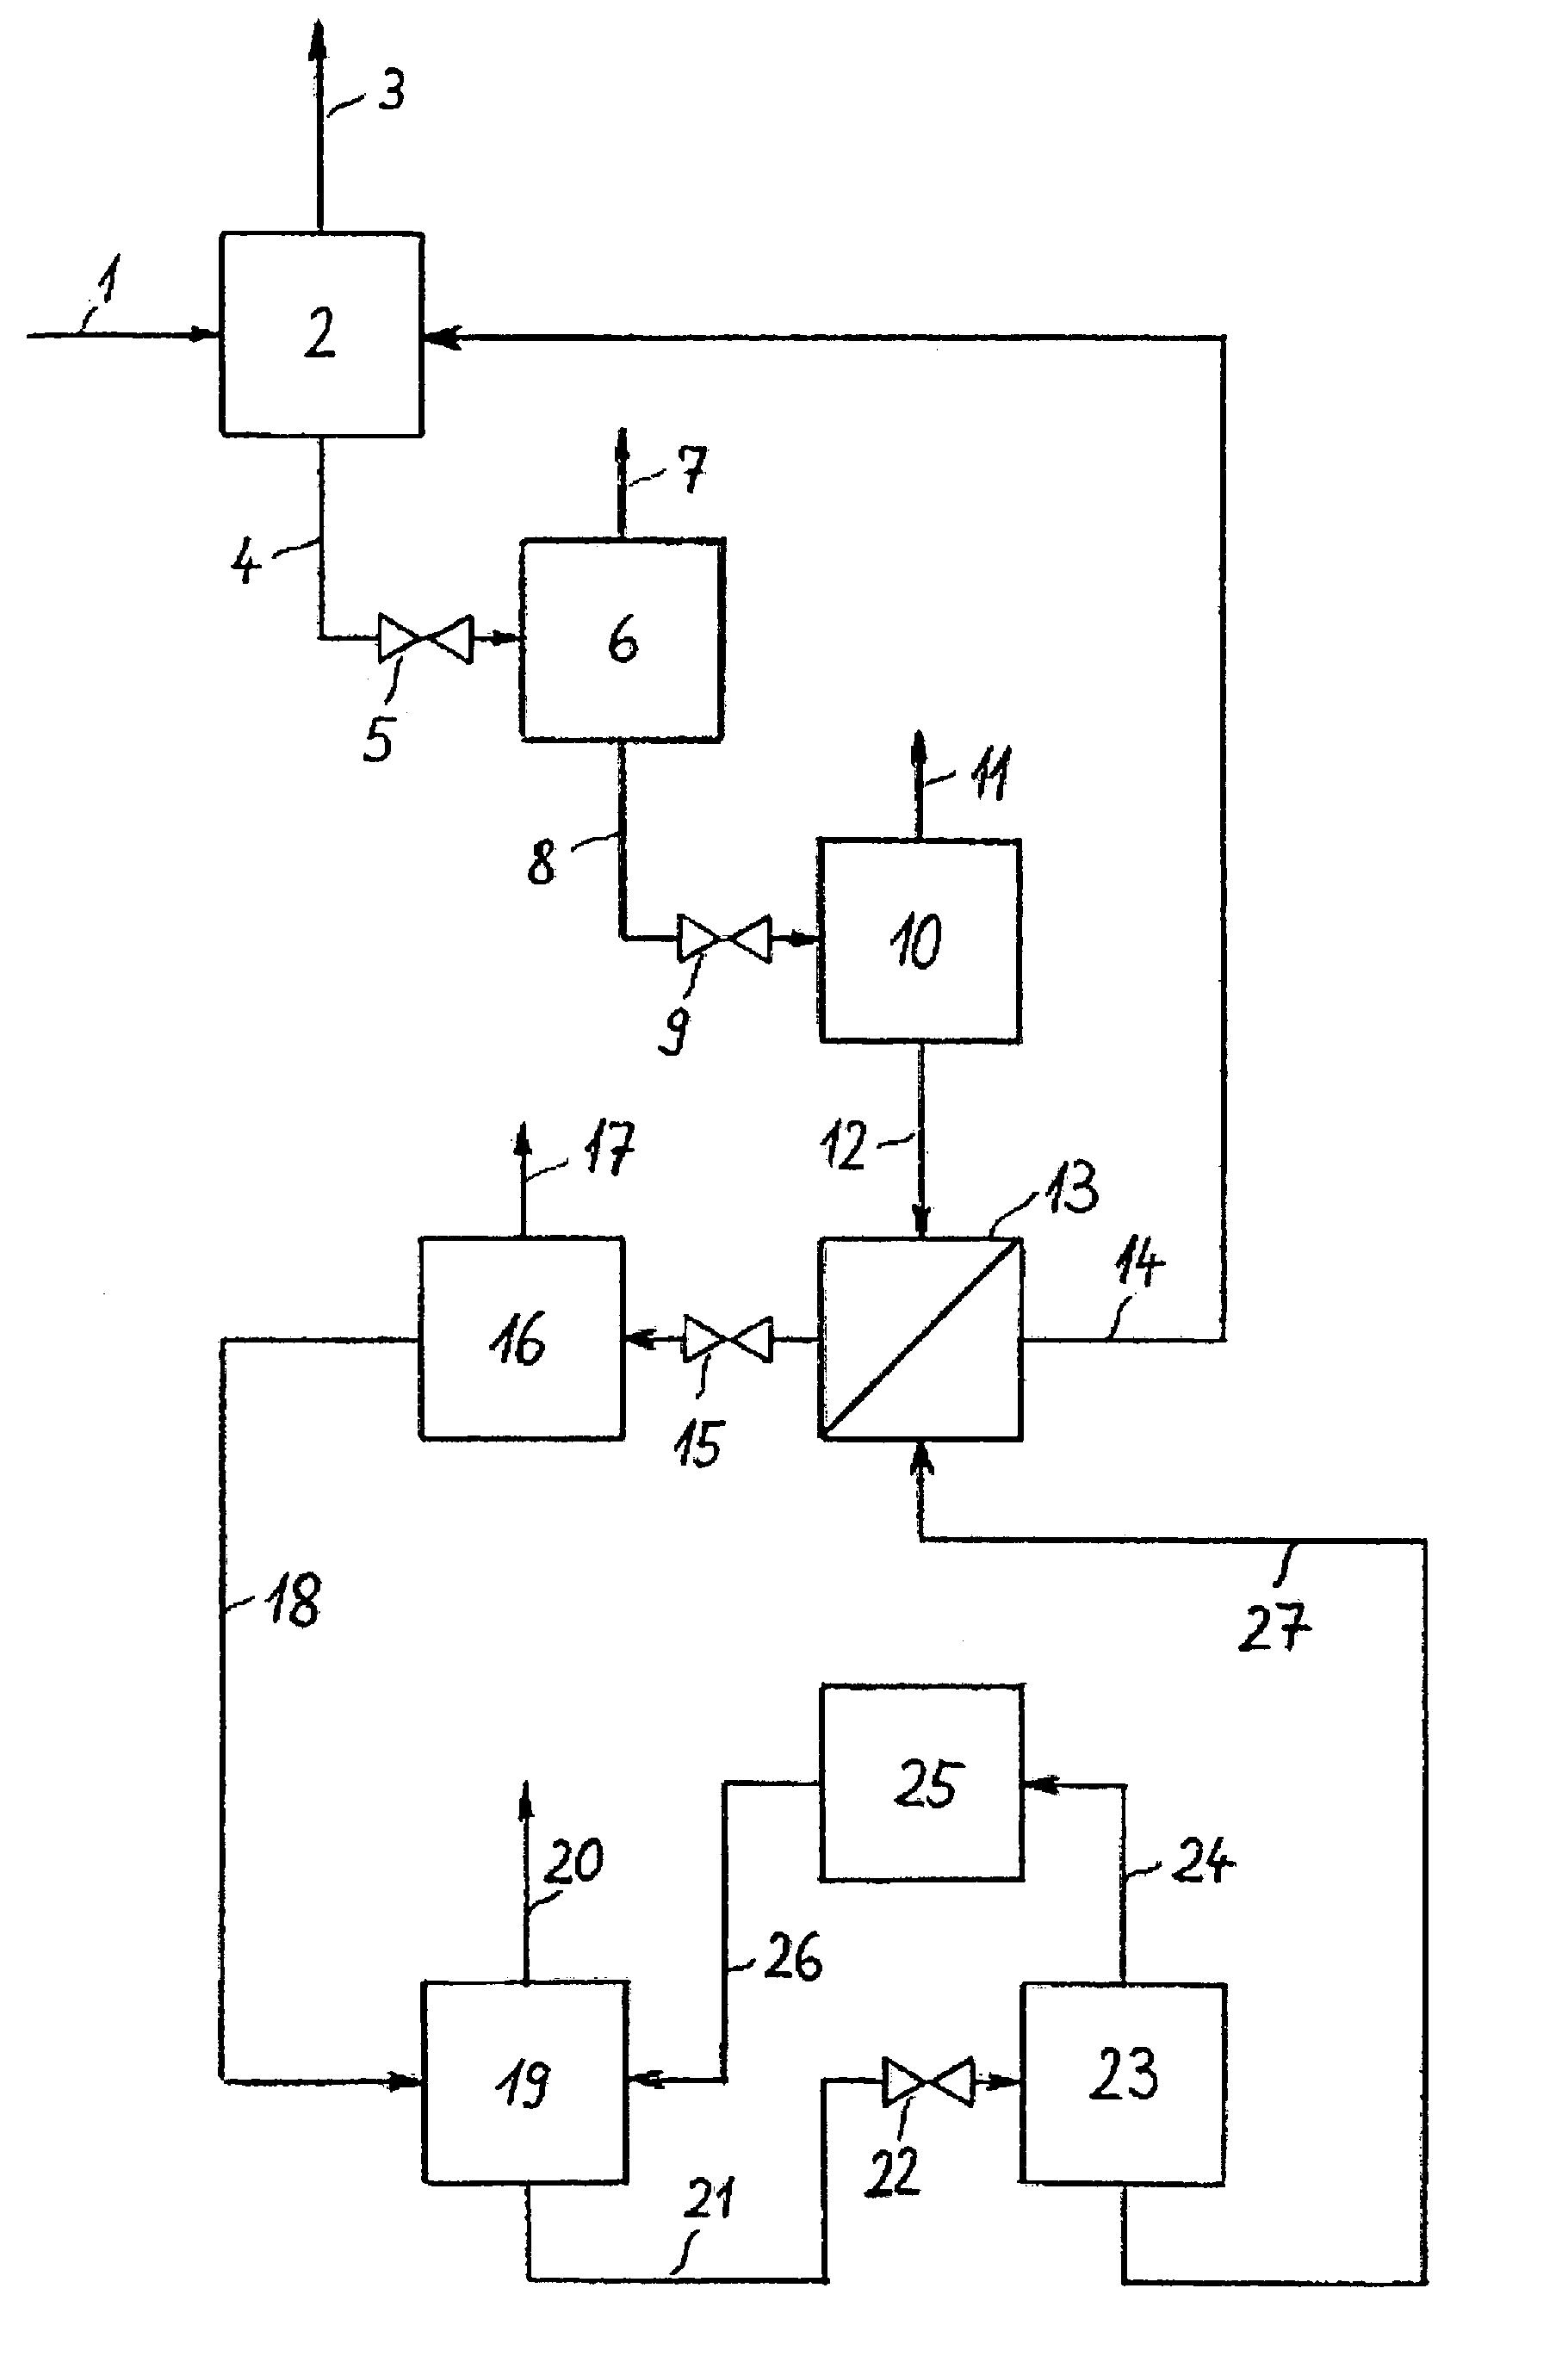 Method for the absorptive outward transfer of ammonia and methane out of synthesis gas